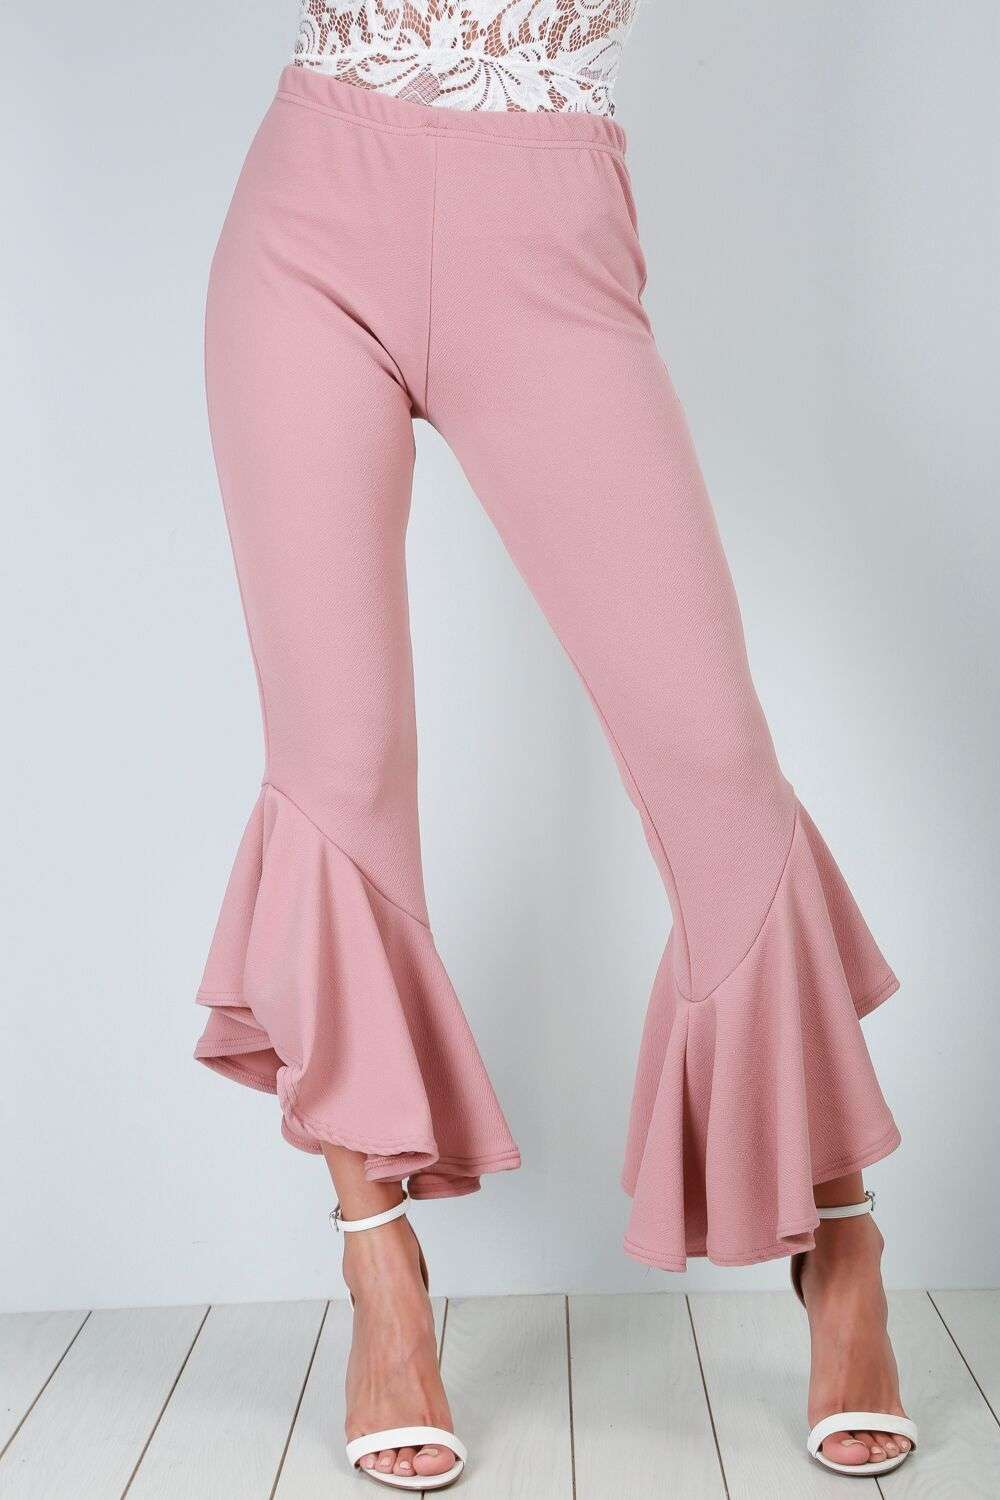 Ruffle Bottom Pant Crop Style – Heart's Desire Clothing